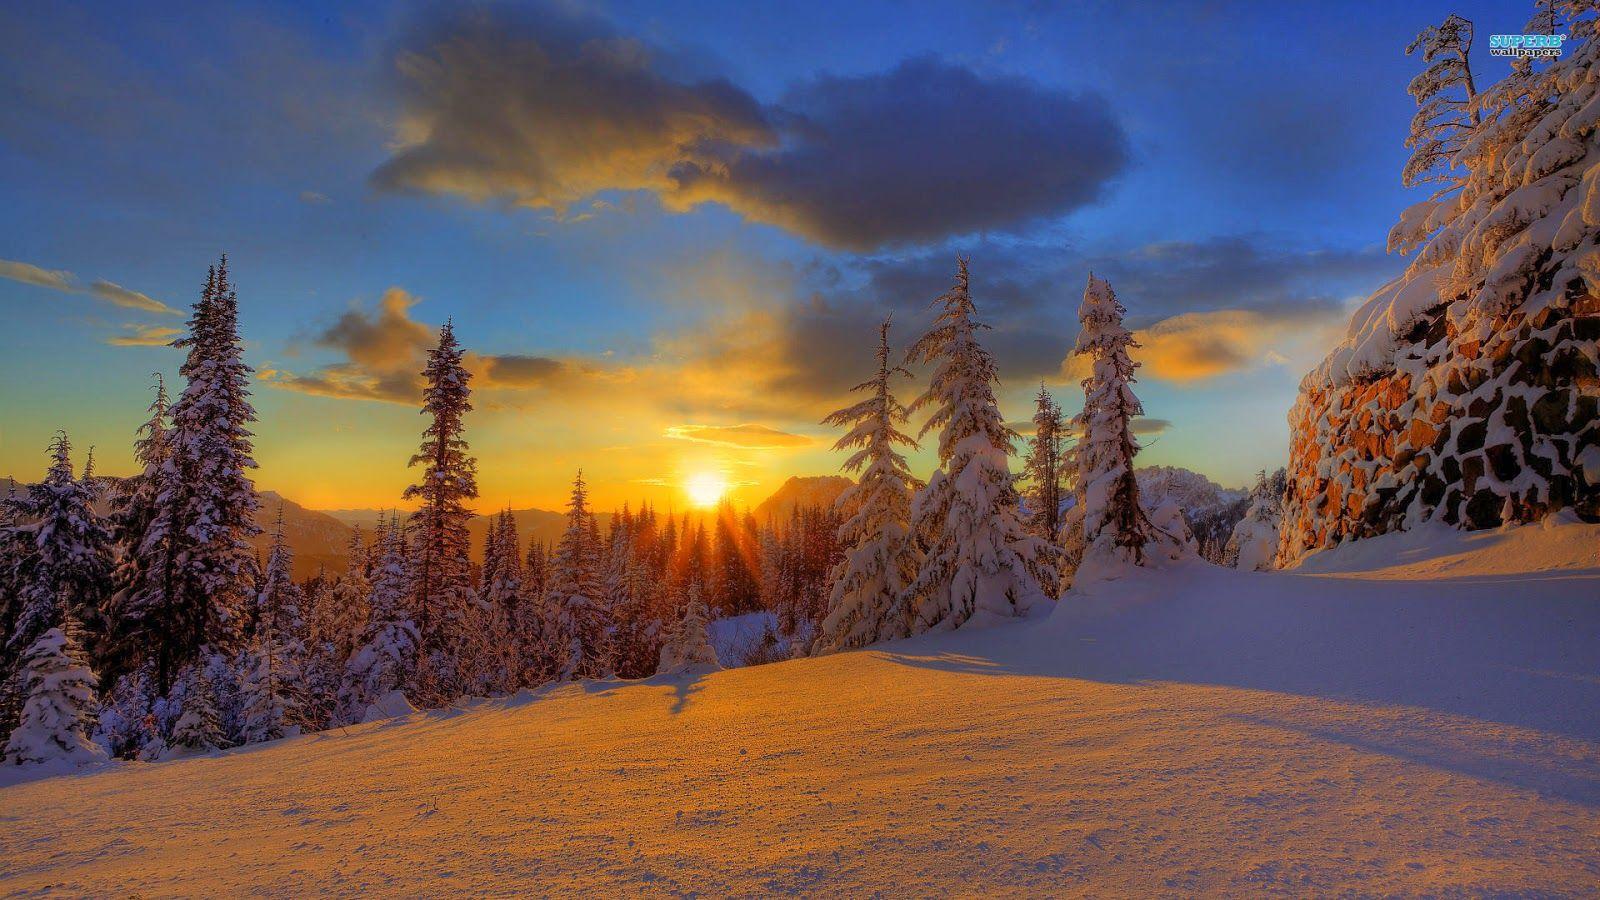 Beautiful Nature Image And Wallpaper: Snow Mountain Sunset. Beautiful Nature Image And Wallpaper